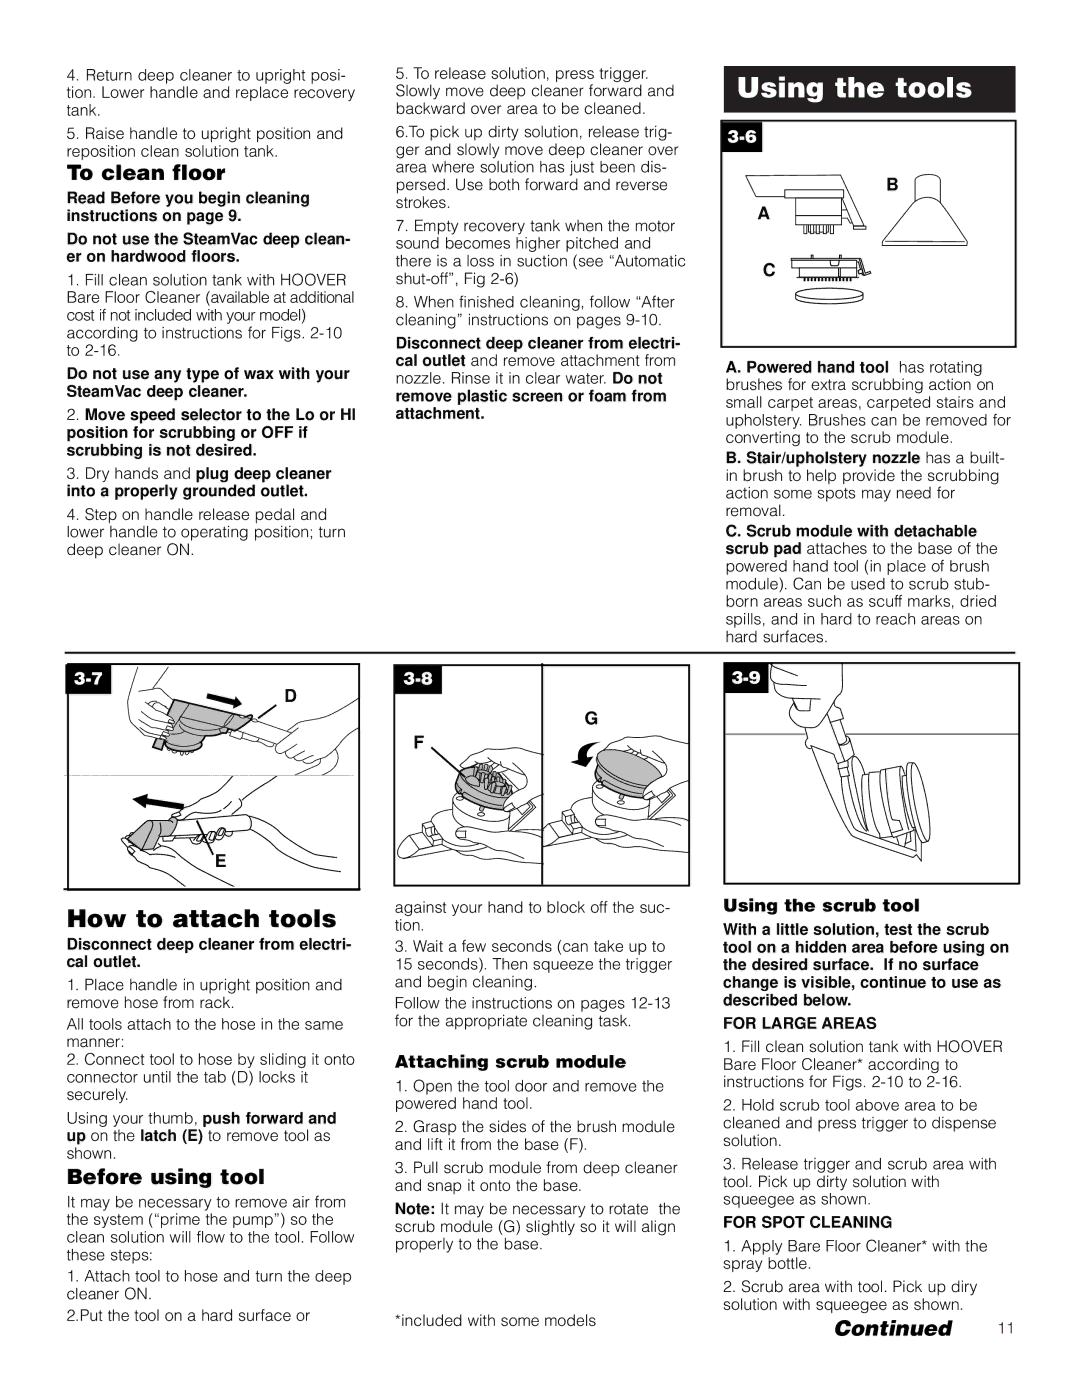 Hoover LS manual How to attach tools, To clean floor, Before using tool, Attaching scrub module, Using the scrub tool 